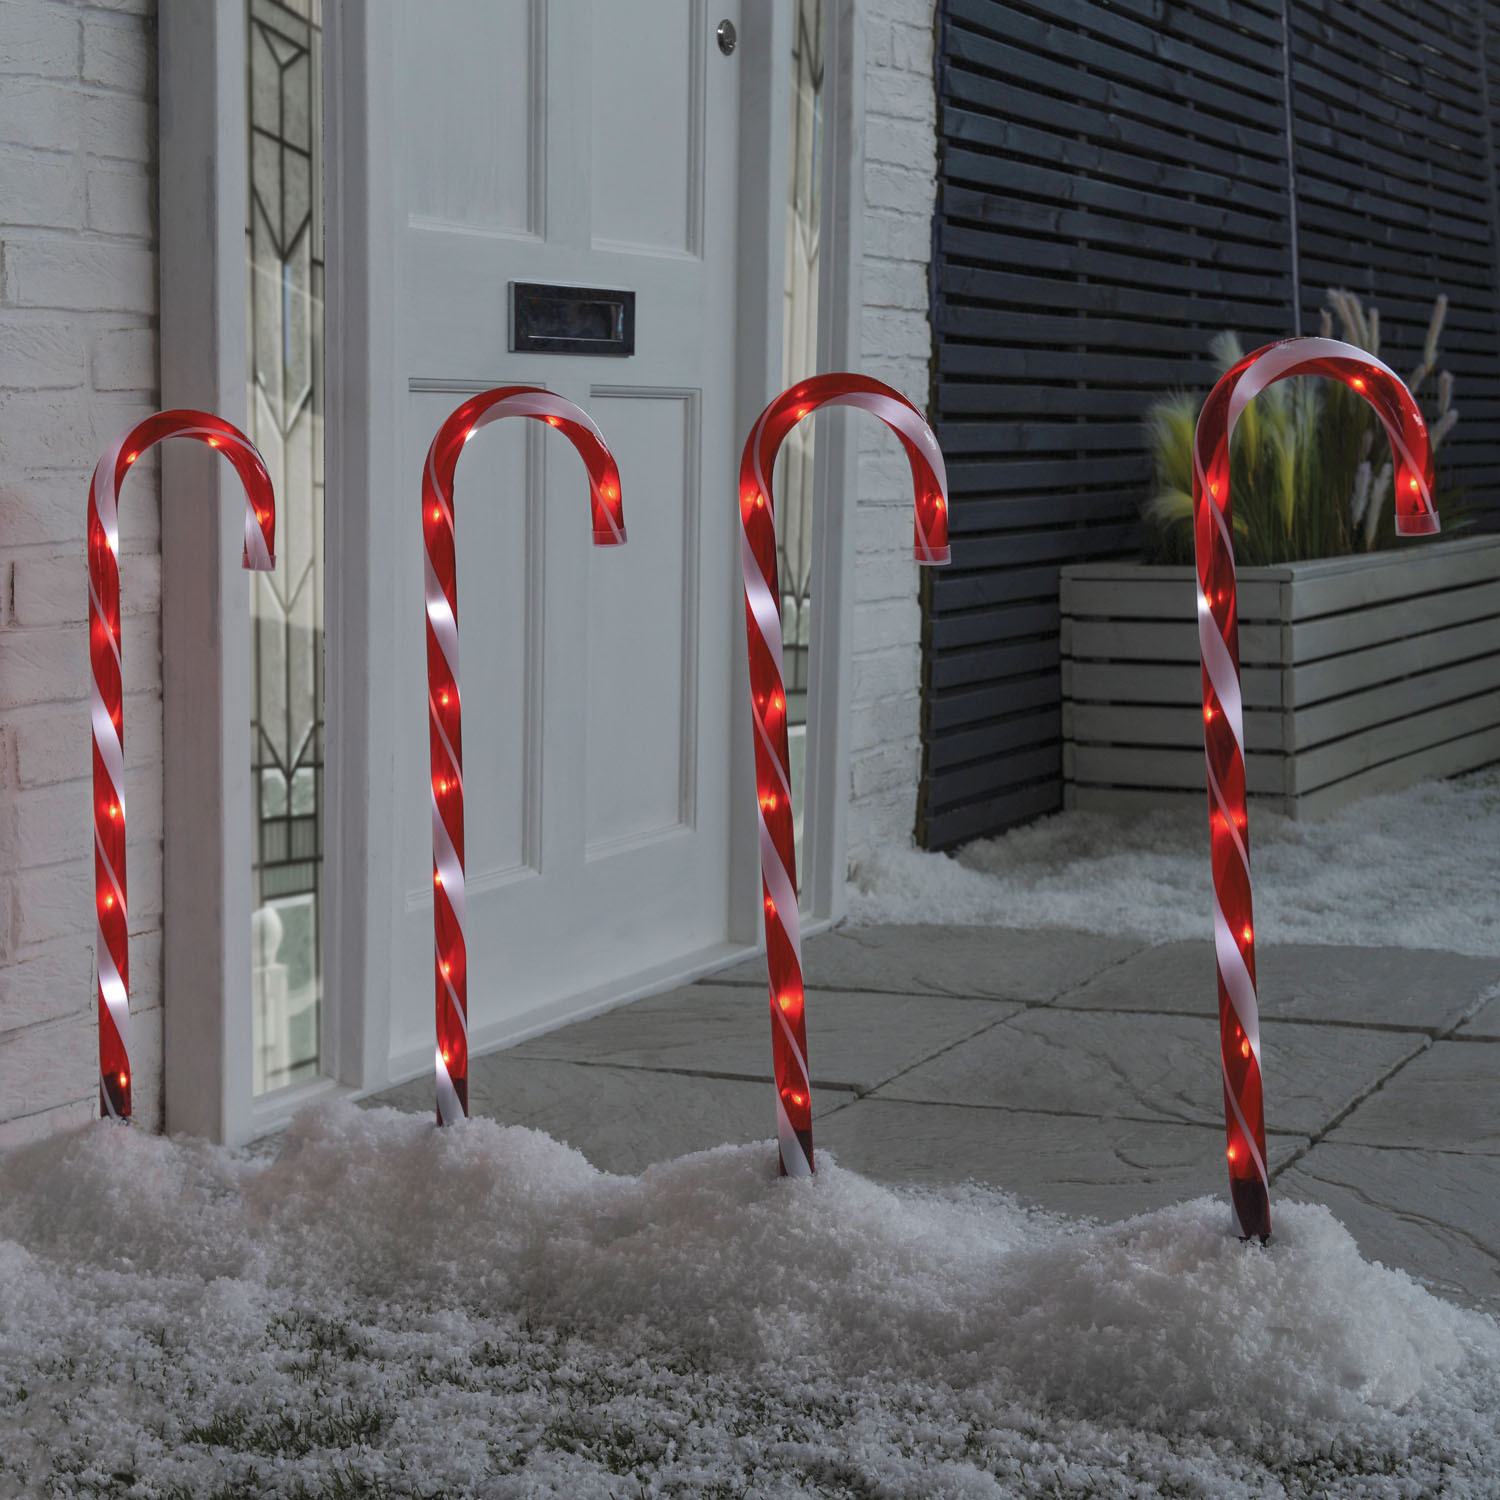 Set of 4 Candy Cane Lights - Red Image 1